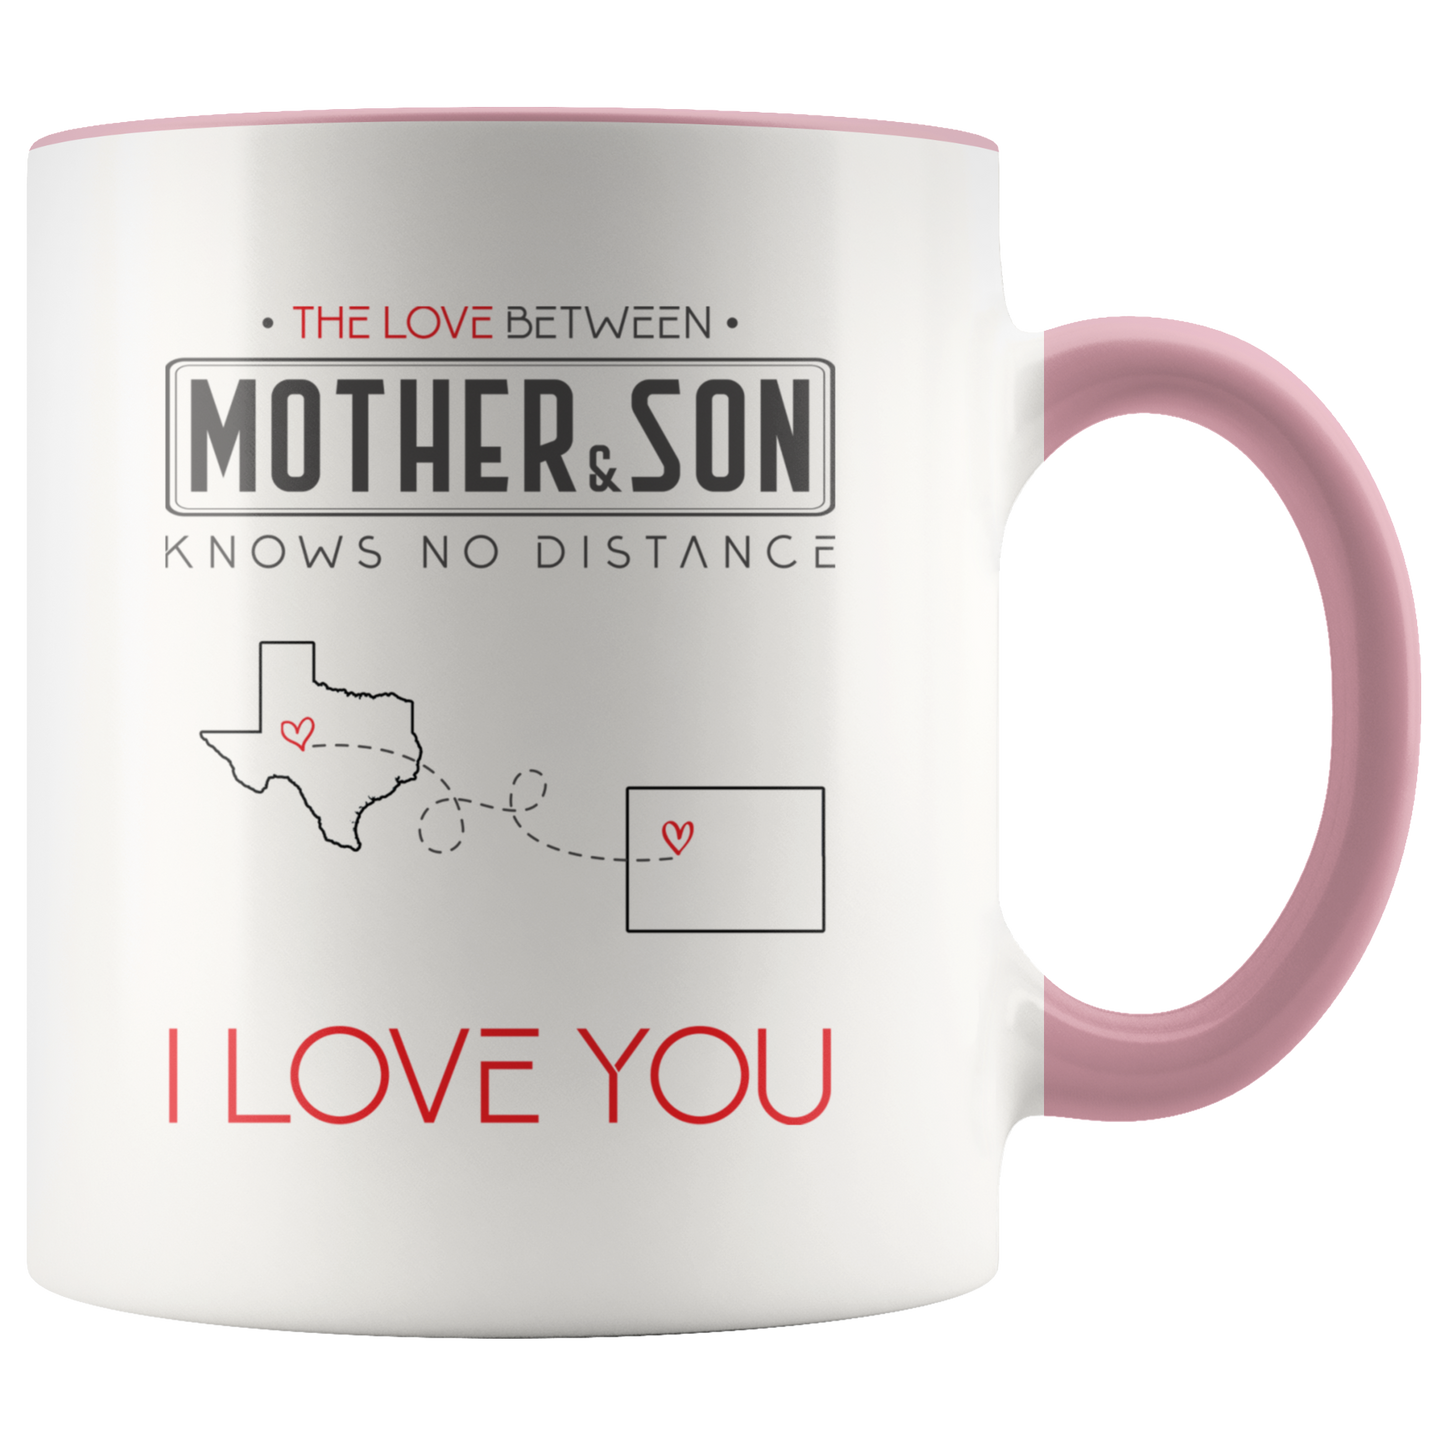 ND-21315402-sp-26136 - [ Texas | Colorado ] (CC_Accent_Mug_) Mom And Son Accent Mug 11 oz  - The Love Between Mother A